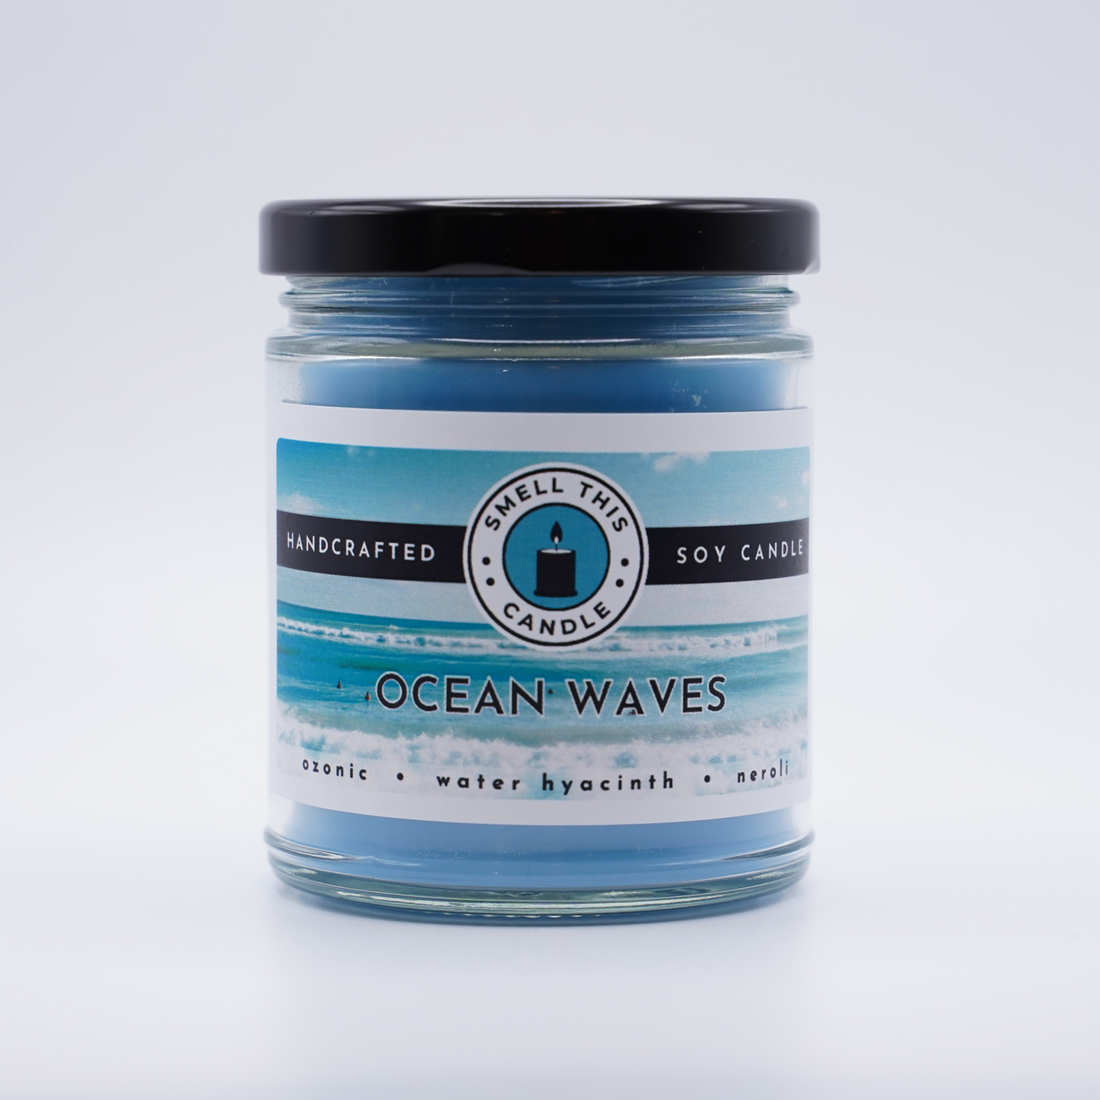 Ocean Waves candle - Smell This Candle - Candles